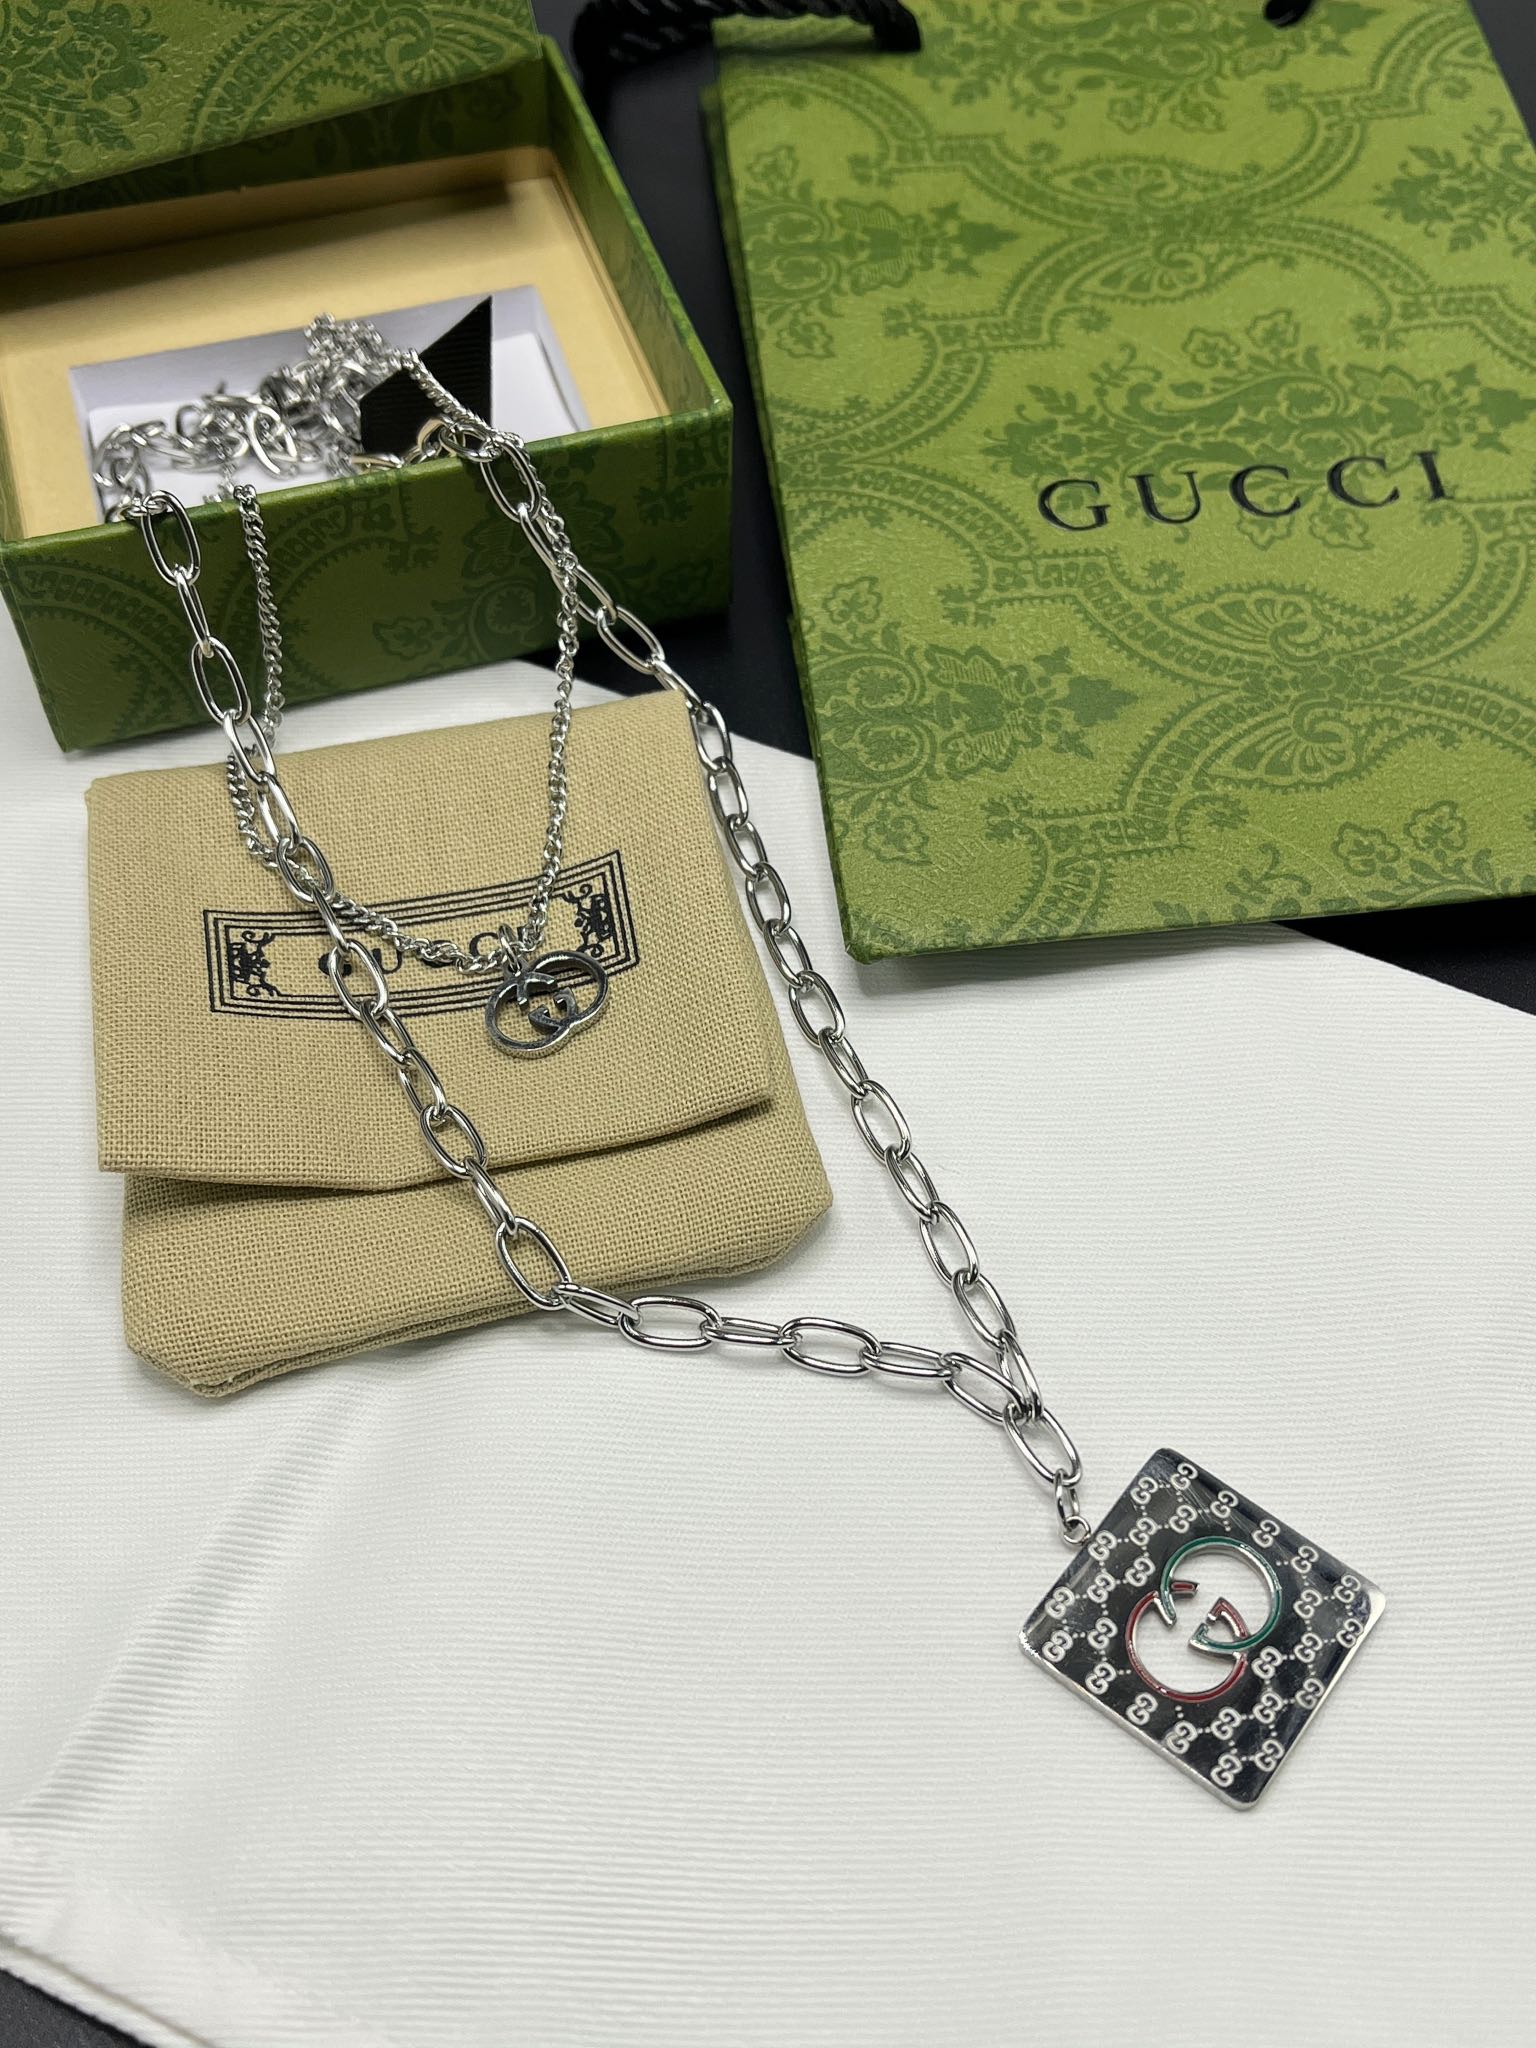 X559 GUCCI necklace